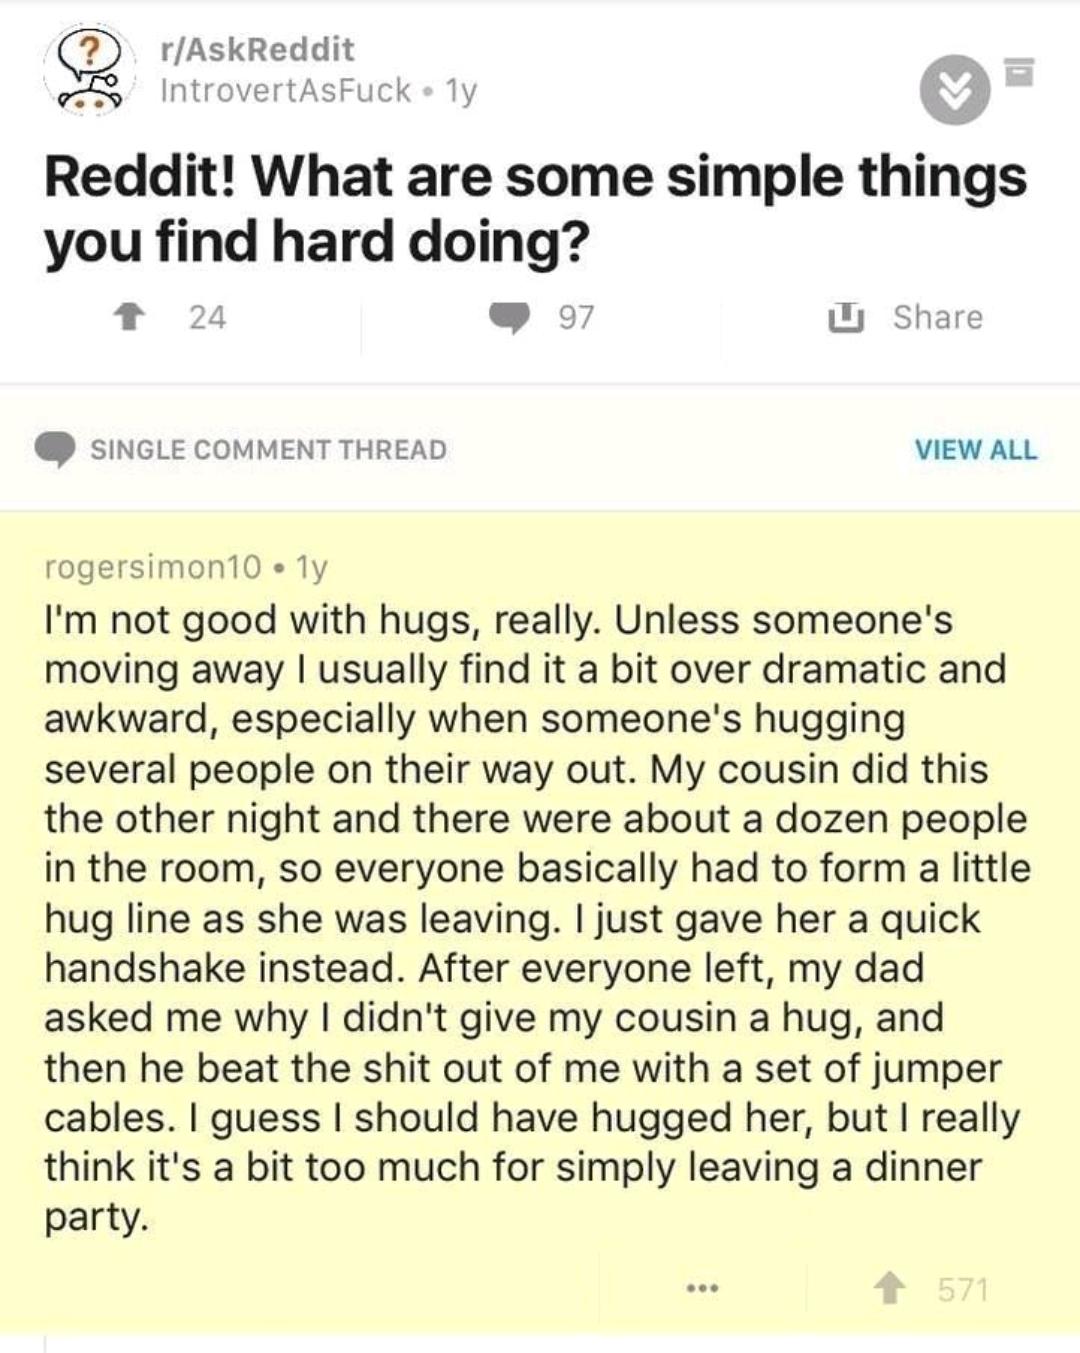 document - rAskReddit IntrovertAsFuckly Reddit! What are some simple things you find hard doing? 24 U 97 Single Comment Thread View All rogersimon 10.1y I'm not good with hugs, really. Unless someone's moving away I usually find it a bit over dramatic and